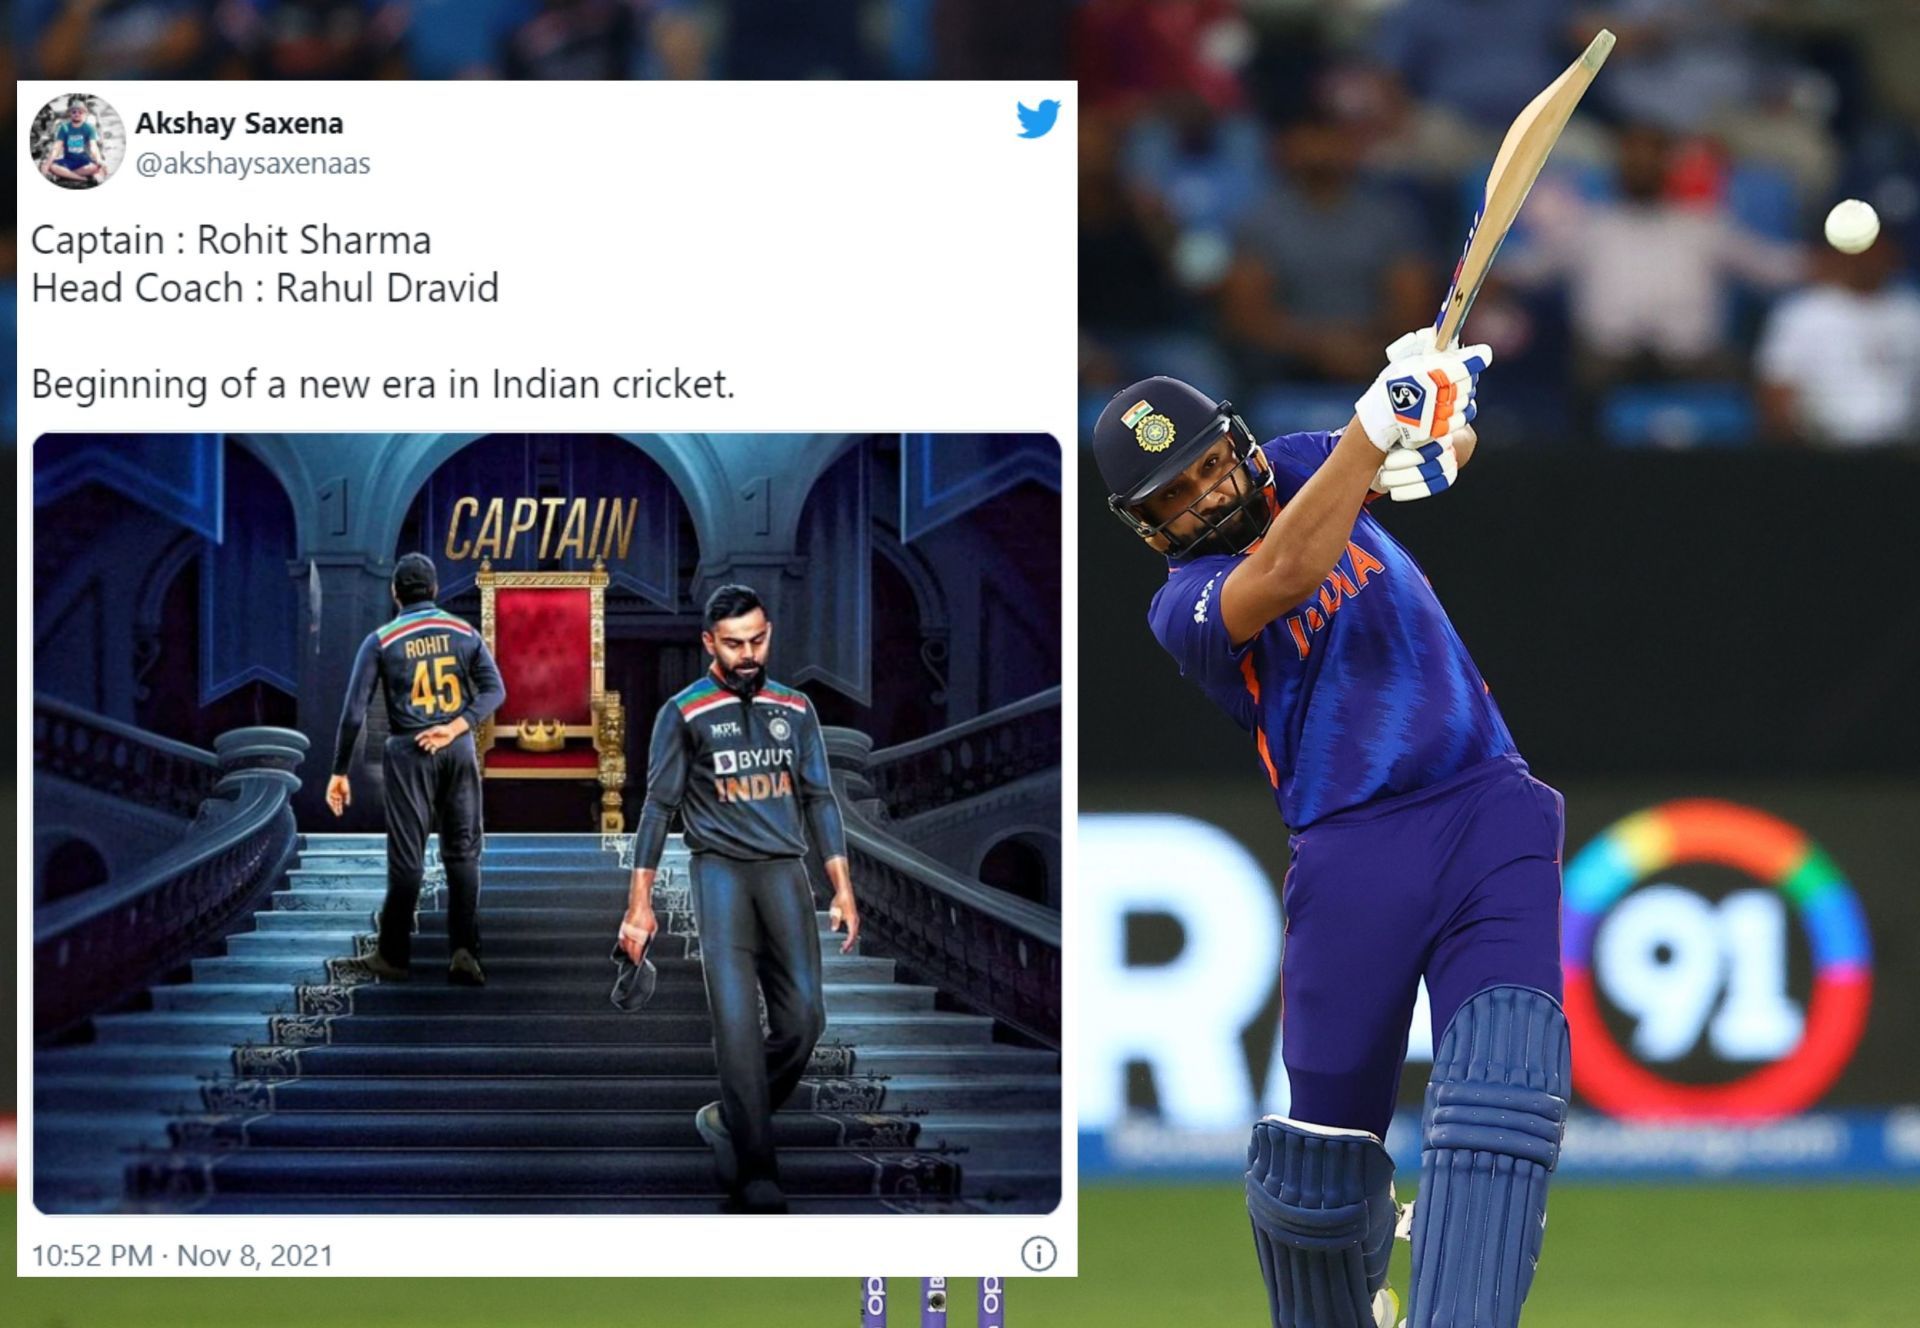 Fans heap praise on Rohit Sharma for the blazing knock and anticipate his appointment as Indian T20I captain